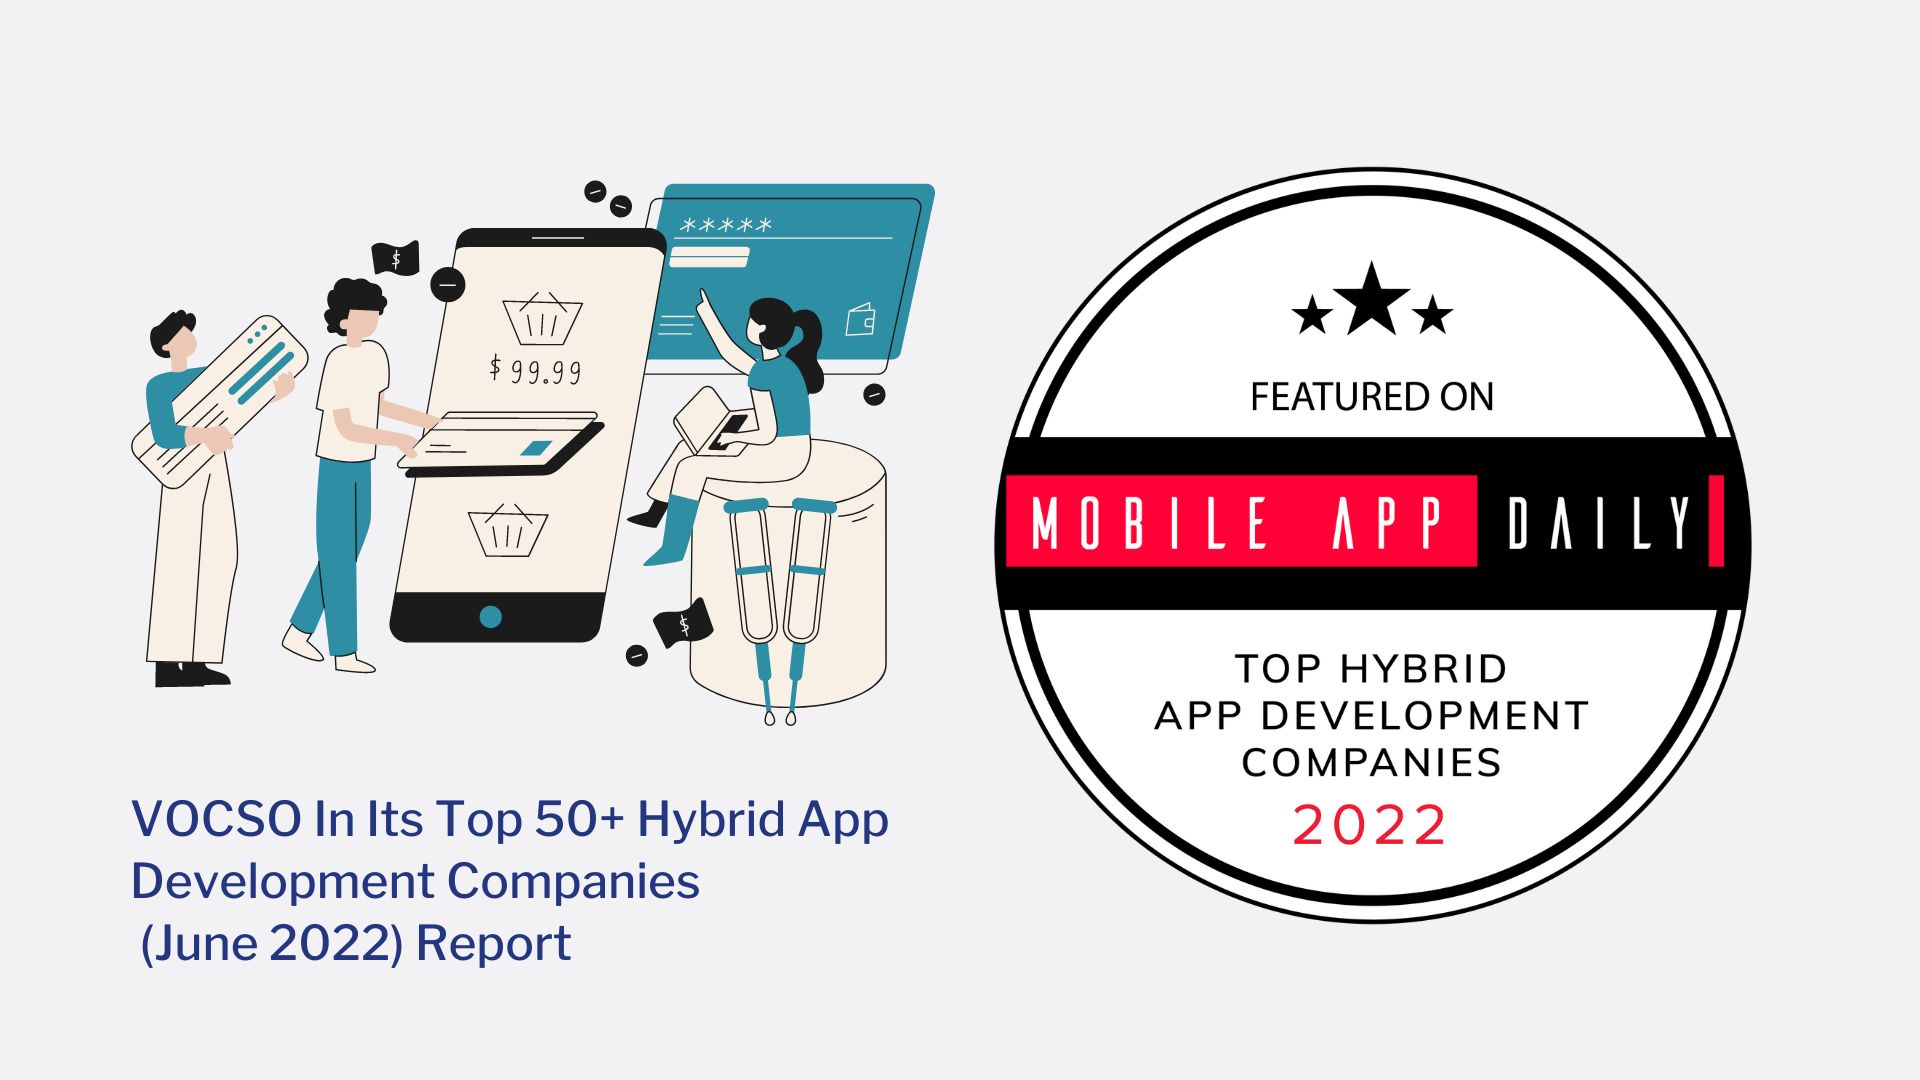 MobileAppDaily listed VOCSO in its Top 50+ Hybrid App Development Companies (June 2022) Report